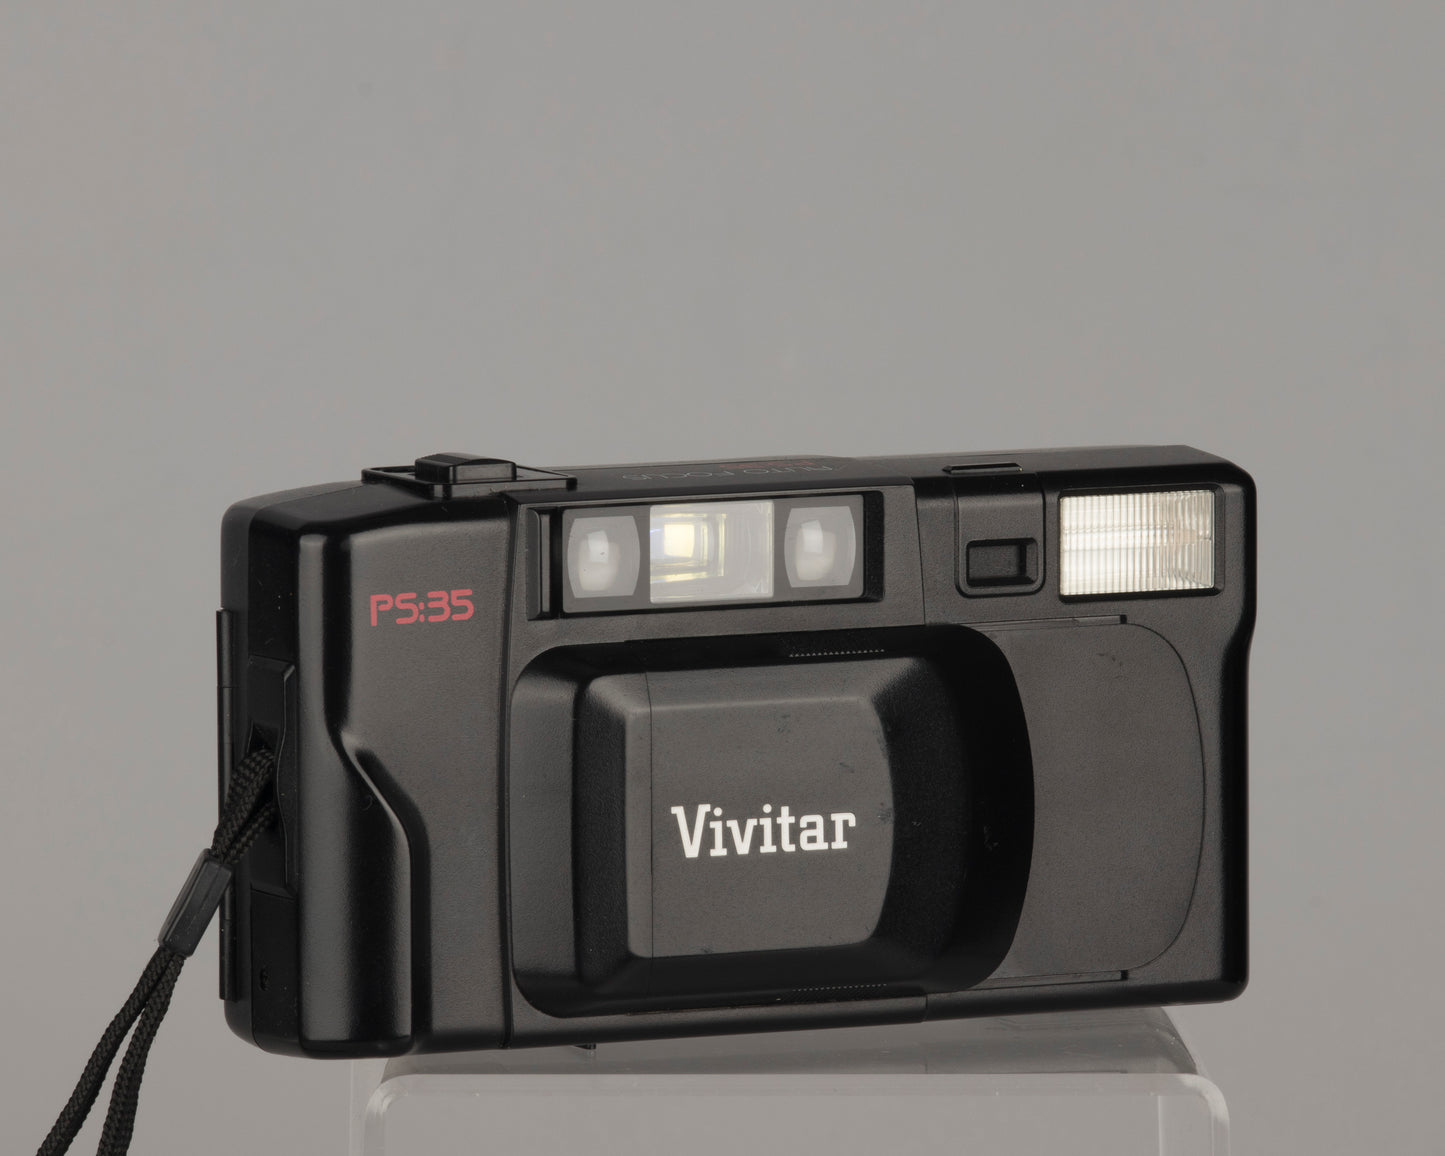 Vivitar PS35 35mm film camera (flash not working; otherwise OK)